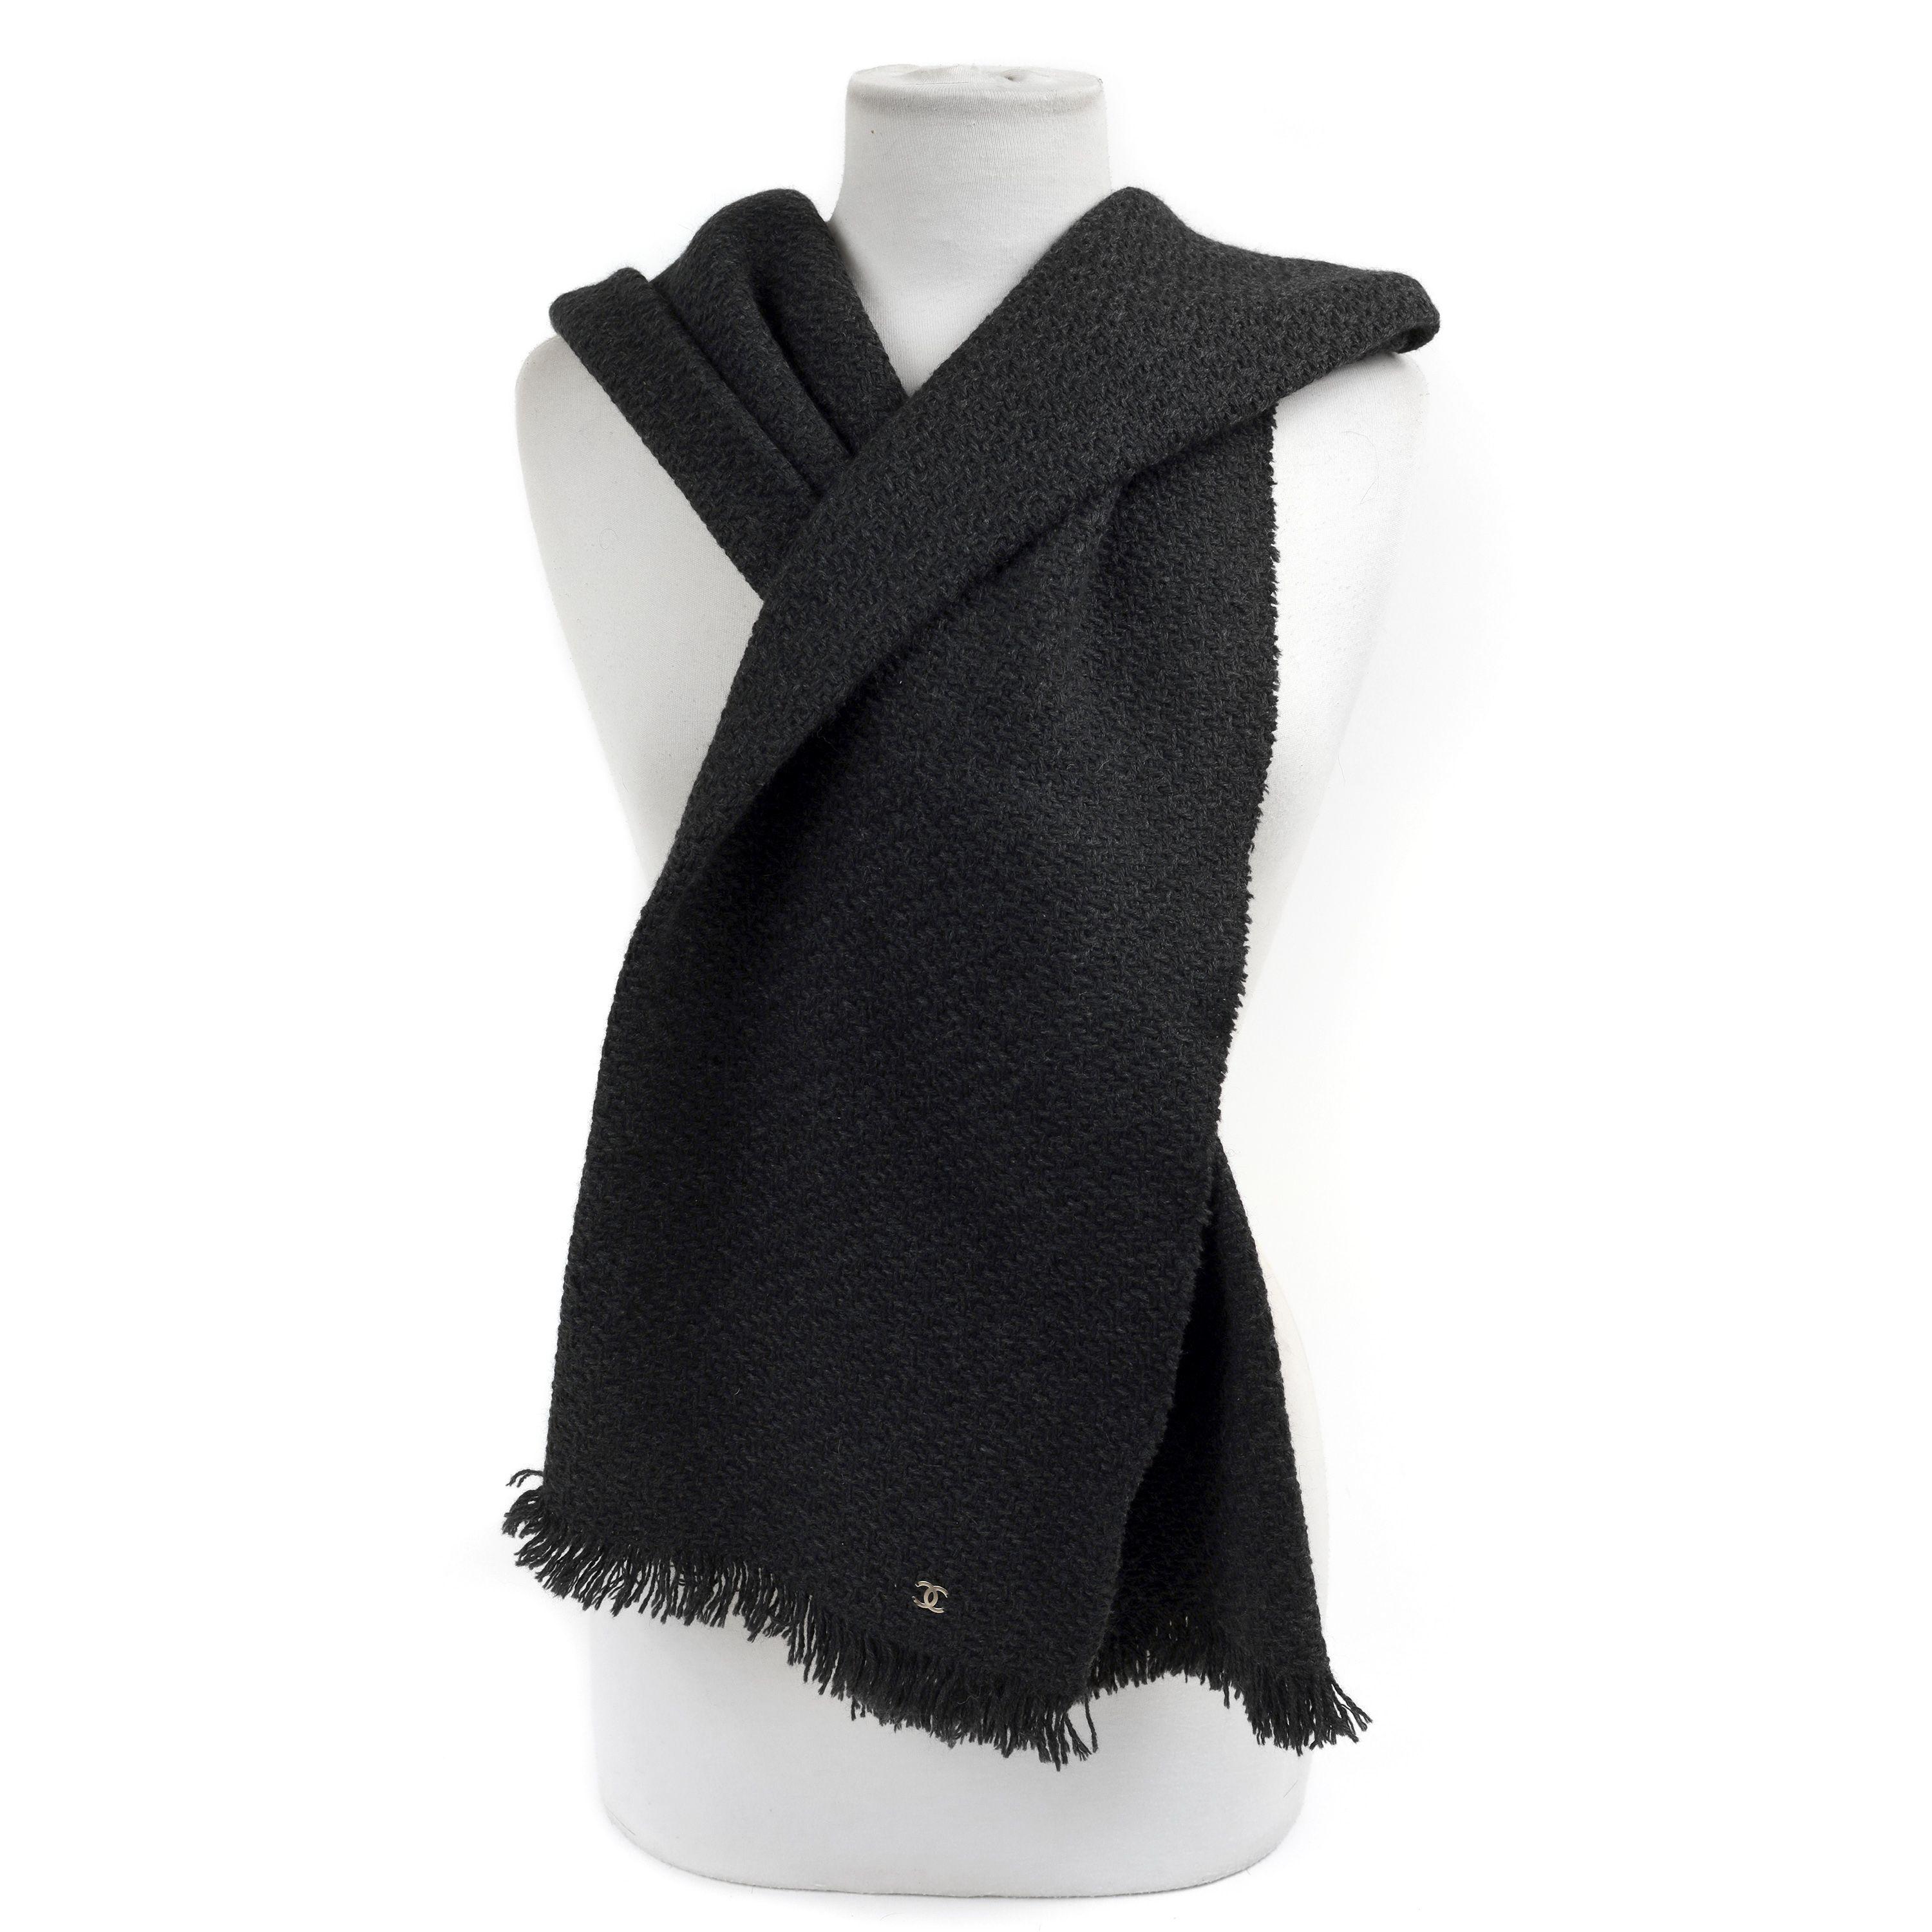 This authentic Chanel Black Wool Blend Scarf is pristine.  Soft black wool blend unisex scarf with fringed edge and CC detail. 

PBF 12638
